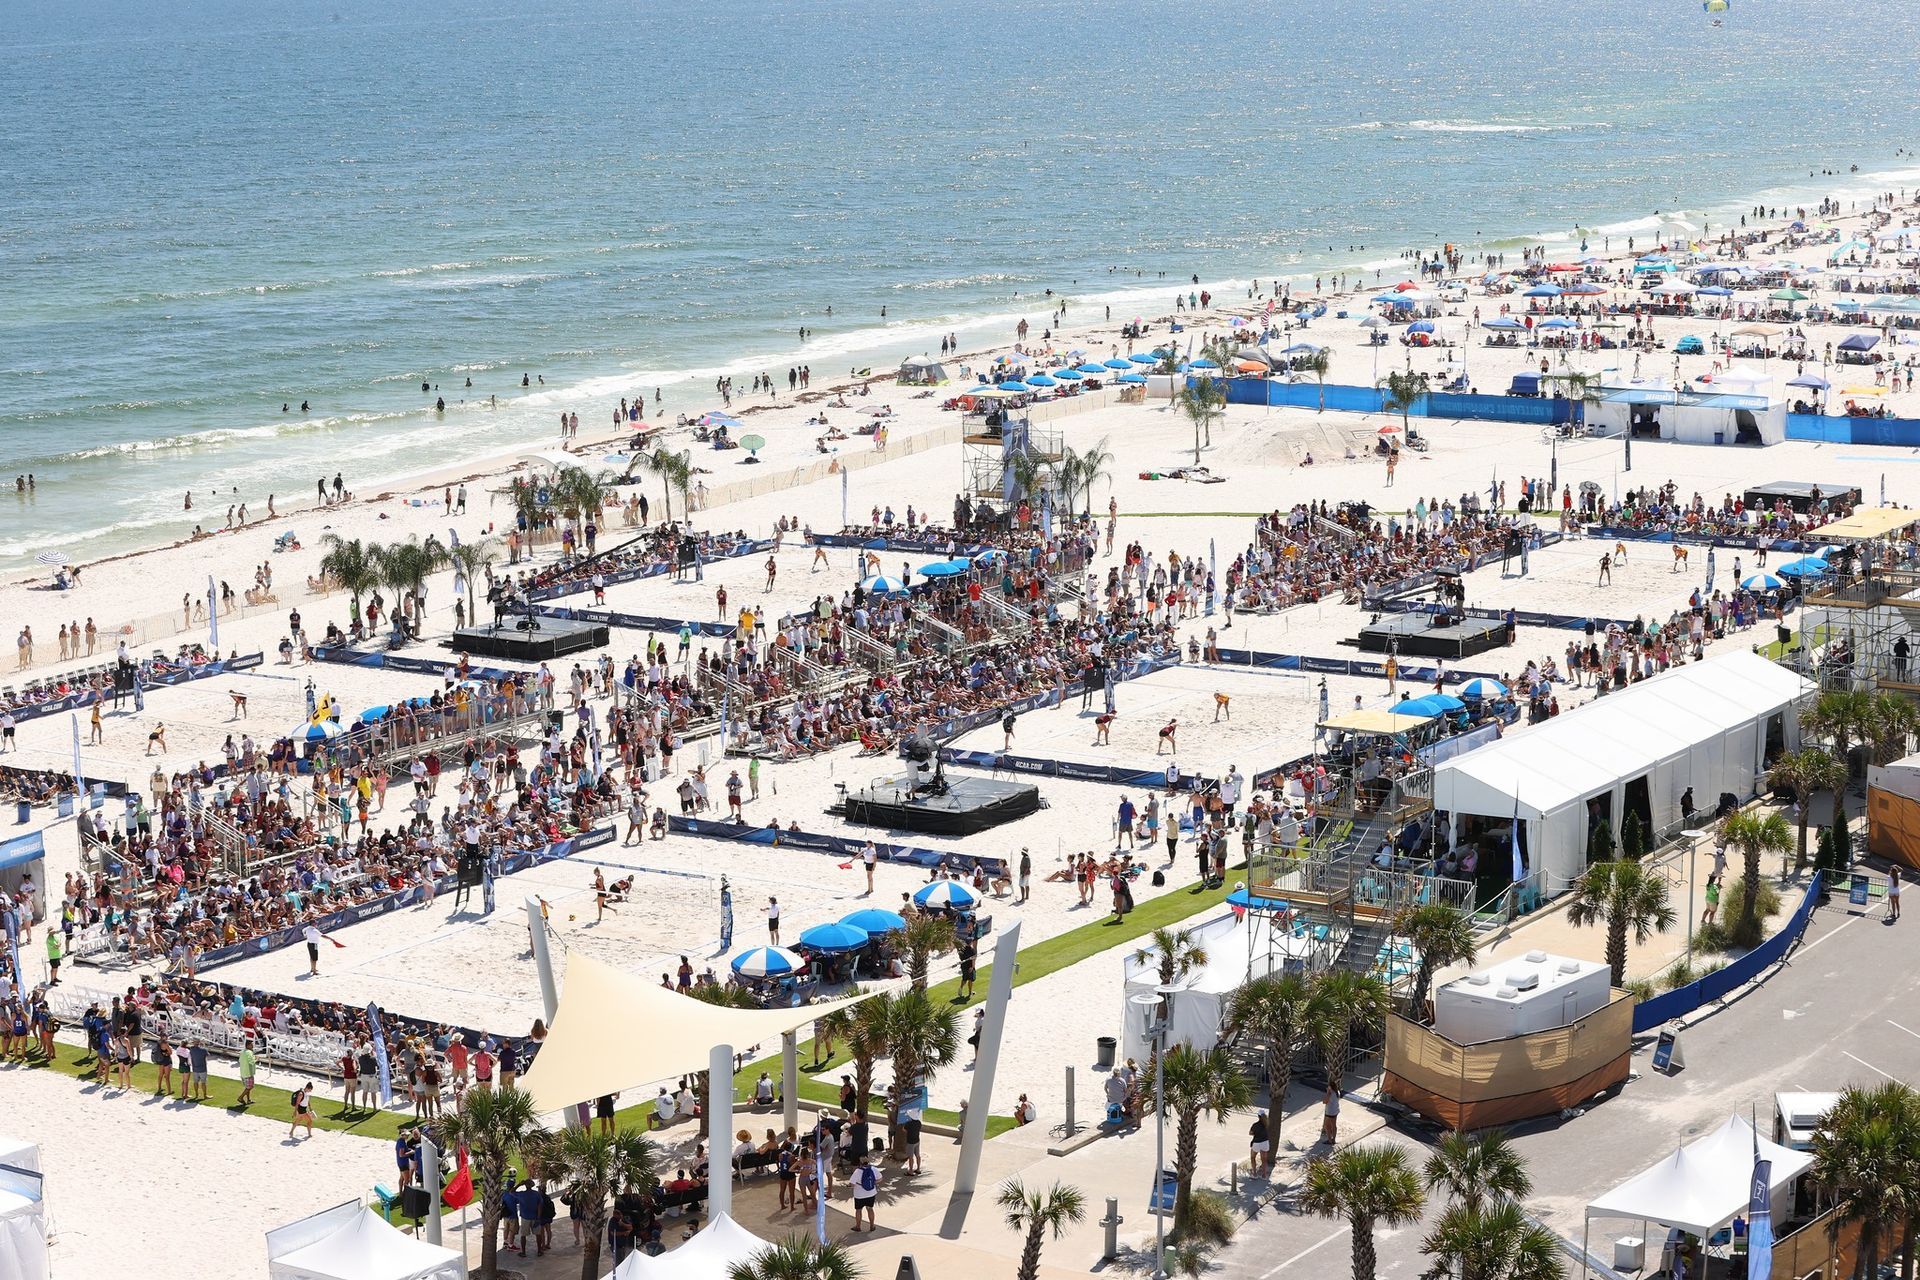 Gulf Shores the 2023 NCAA Beach Volleyball Championship